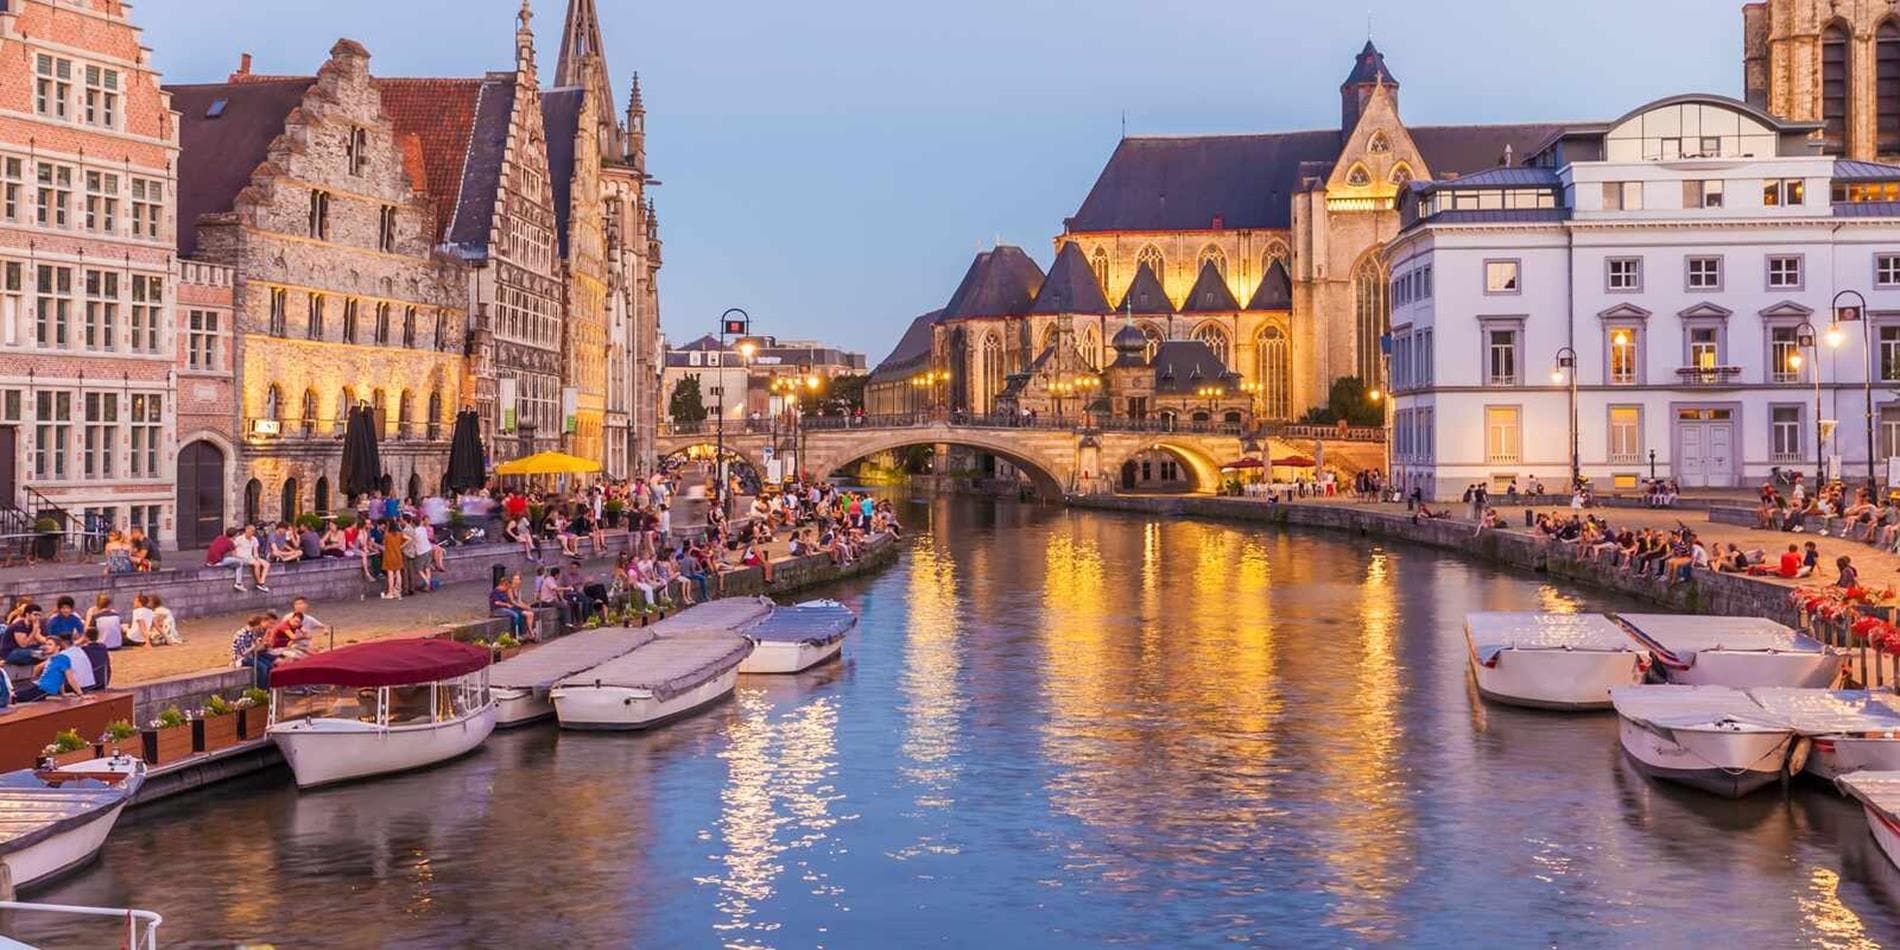 Looking down the river to Ghent Old Town at dusk, Belgium